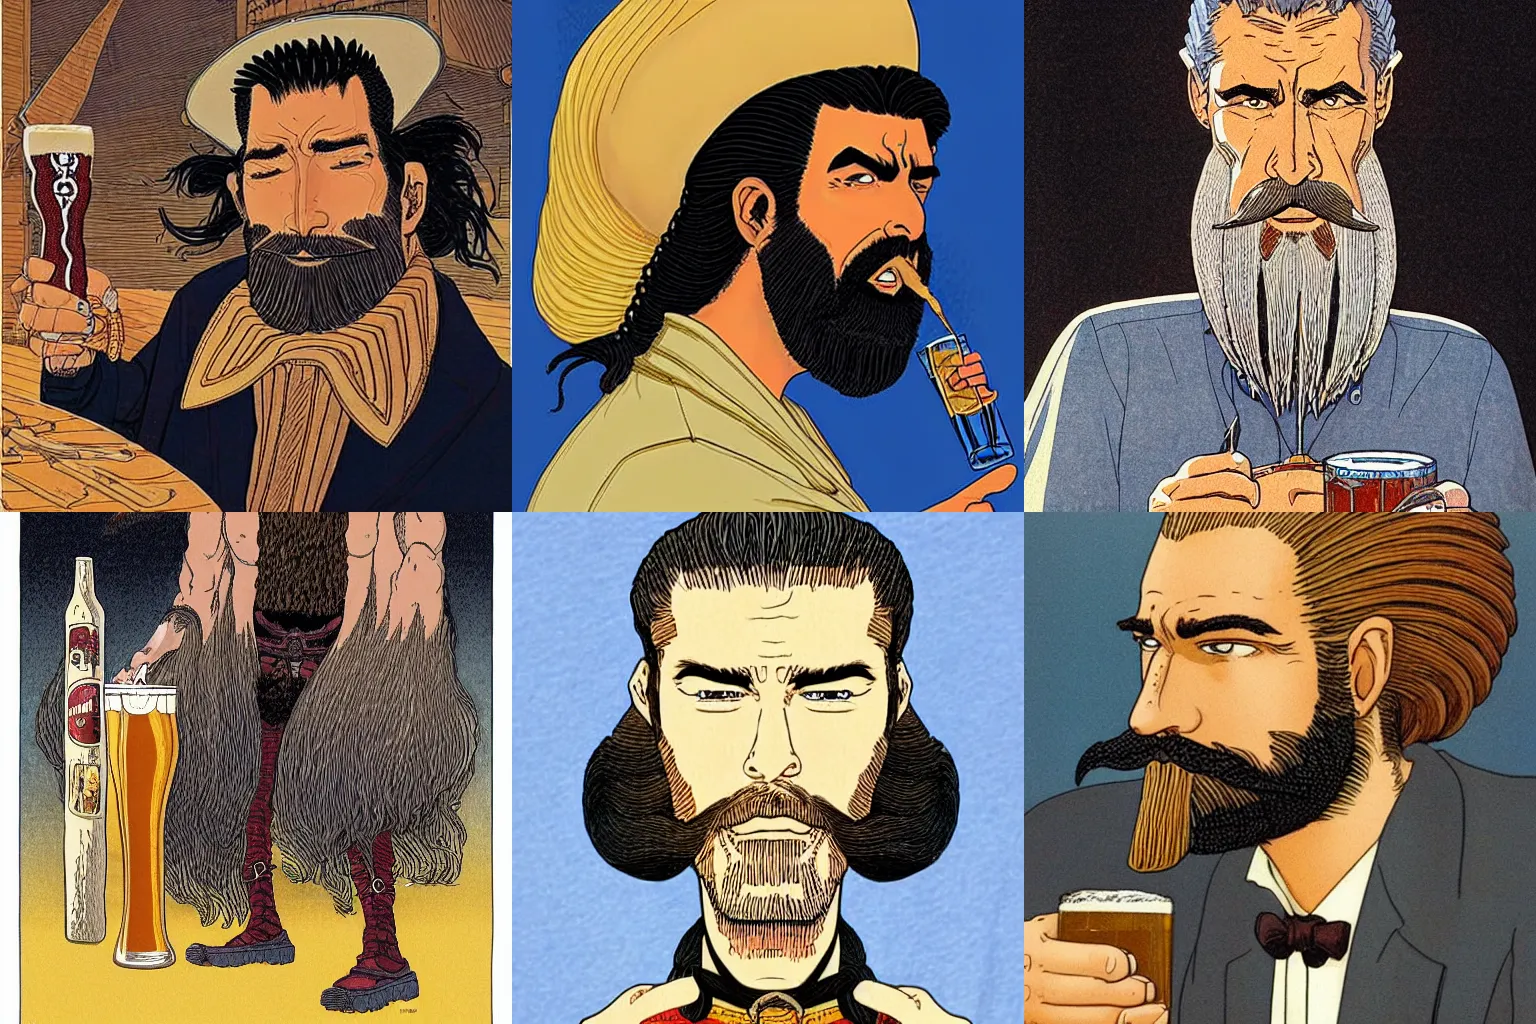 Prompt: Jean Giraud style long black forked braid beard thick eyebrows man with black hair drinking a pint of beer